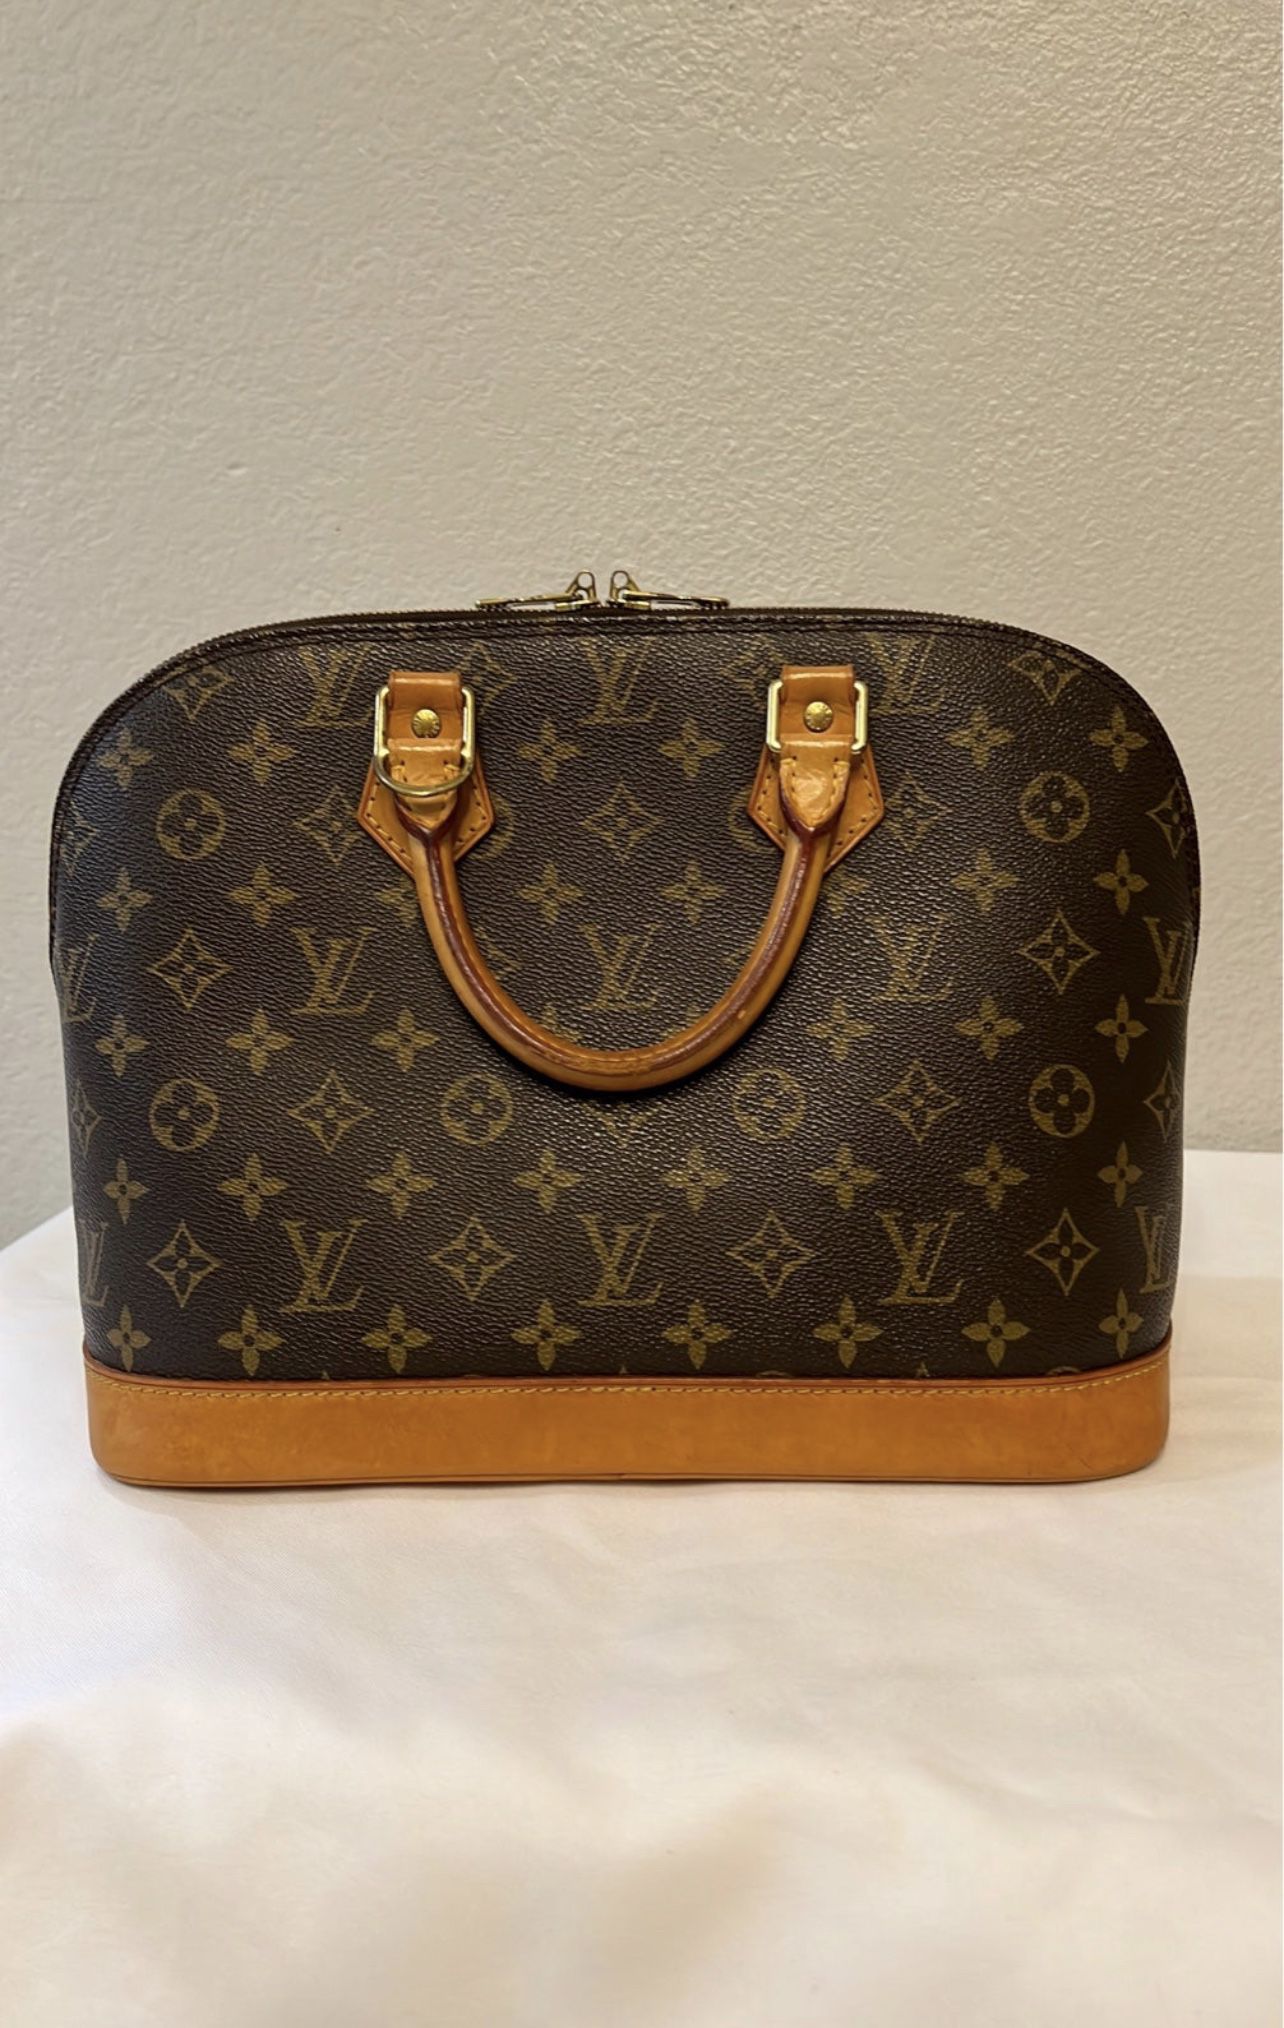 AUTHENTiC LOUiS VUiTTON for Sale in Ind Crk Vlg, FL - OfferUp